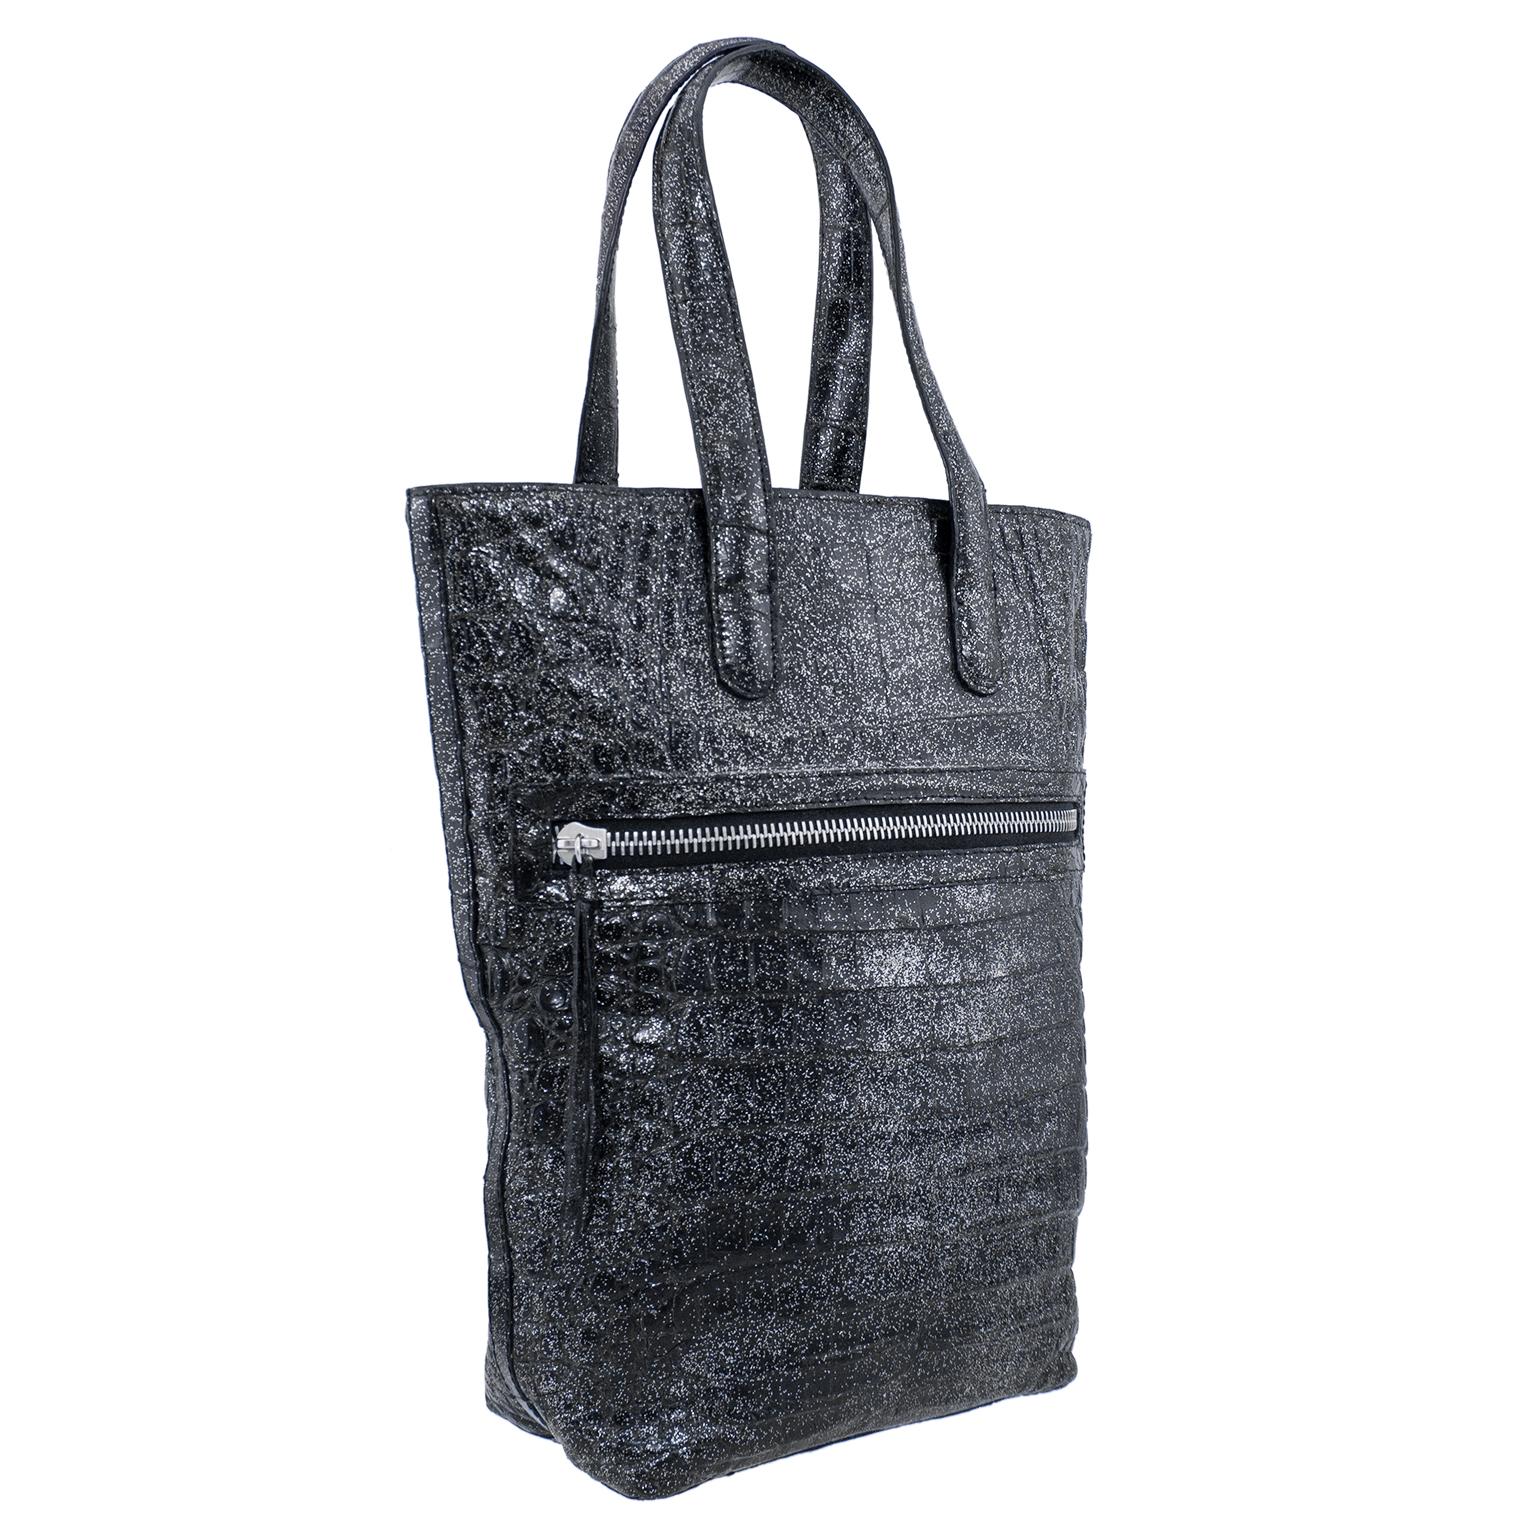 Beautiful small anthracite tote by Colombian/American designer Nancy Gonzalez. Black with an all over dusting of silver sparkles, gives this bag a festive metallic feel. Tall and narrow with 2 top handles and an exterior slit pocket with heavy duty